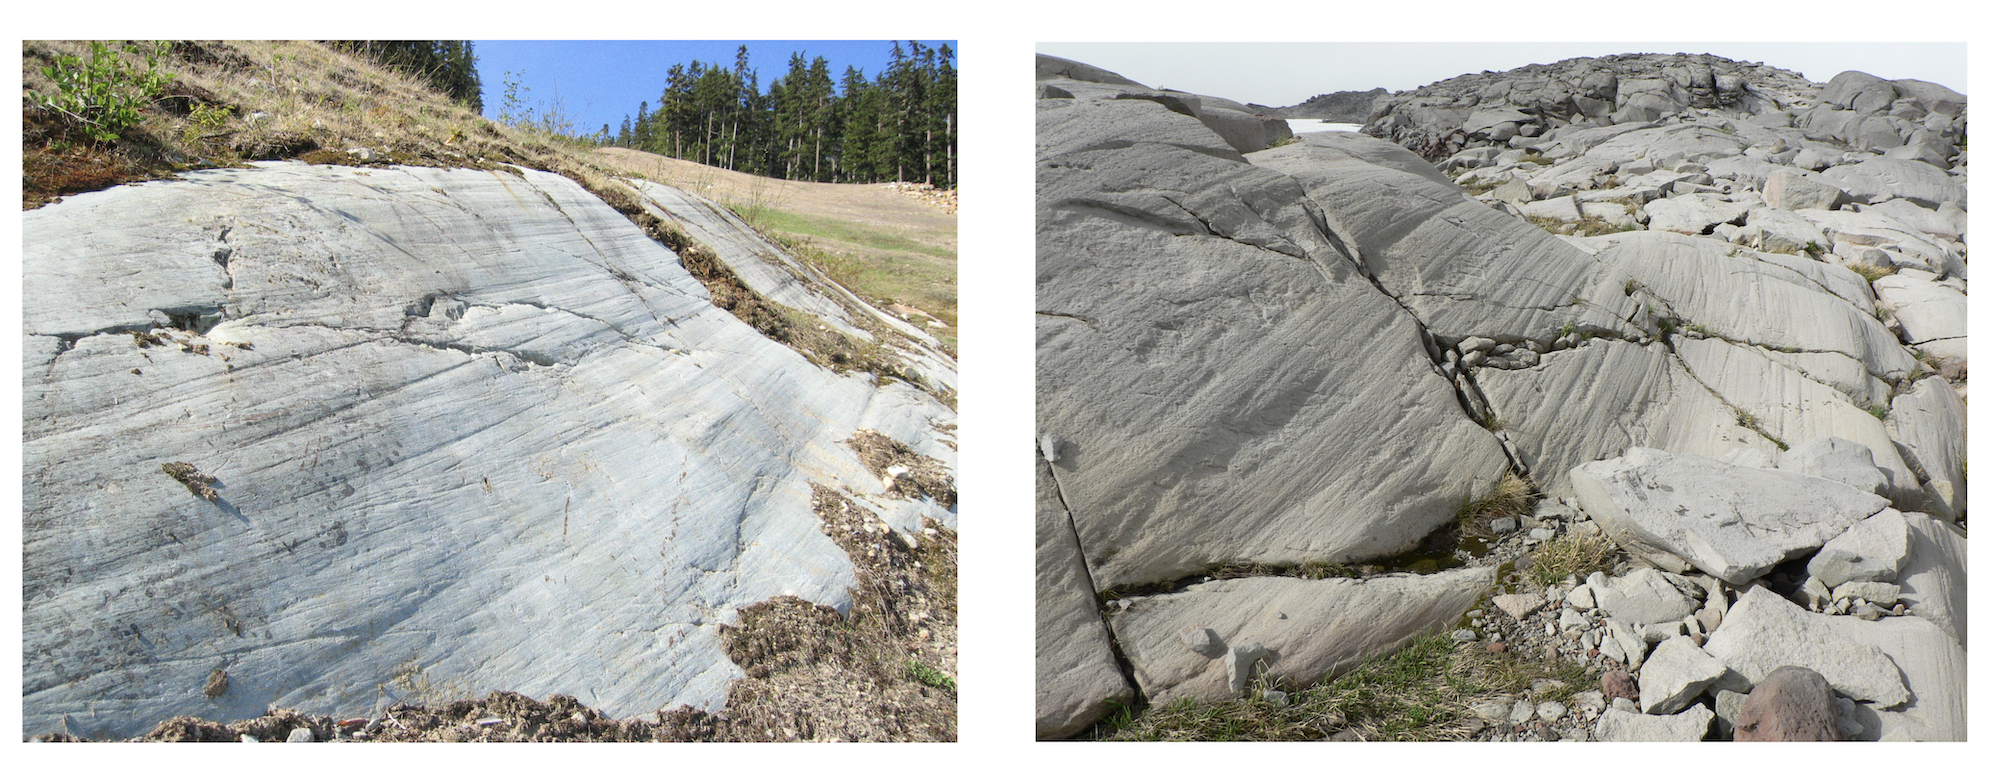 Two photos: the left photo shows a big, smooth rock with parallel linear grooves and the right photo shows smoothed, polished rock with parallel linear grooves abraded.